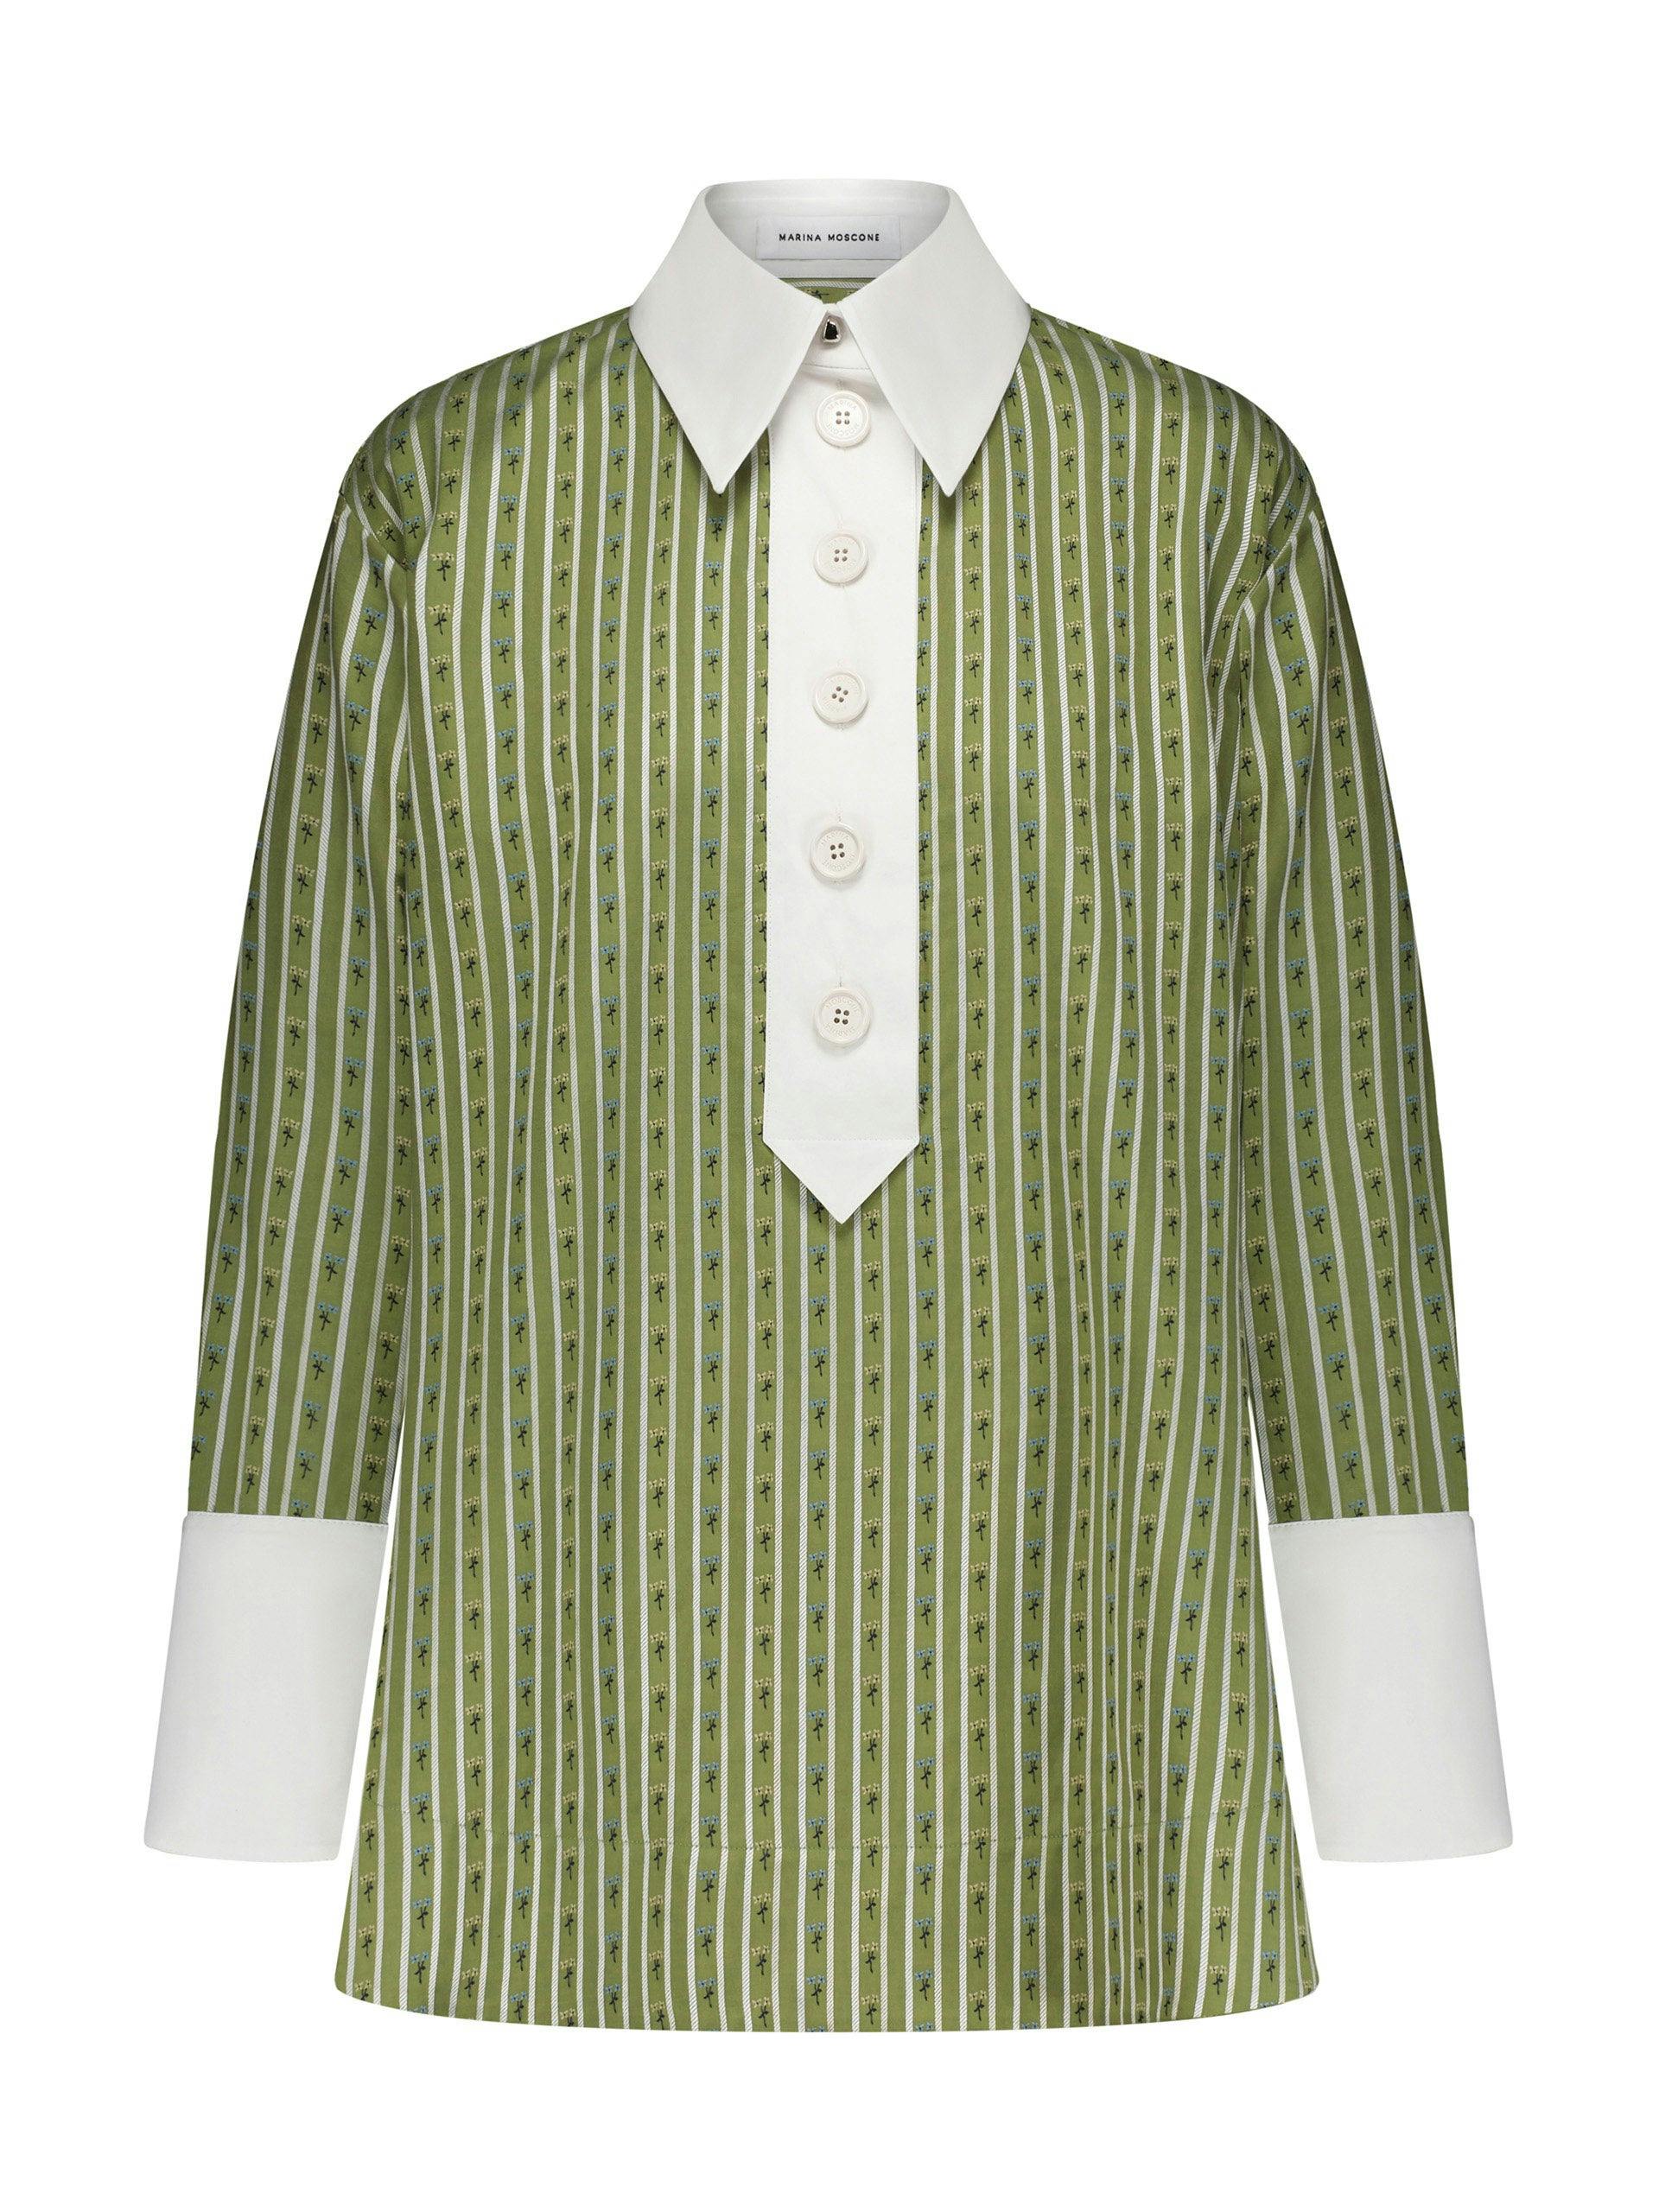 Moss green and white contrast collar shirt